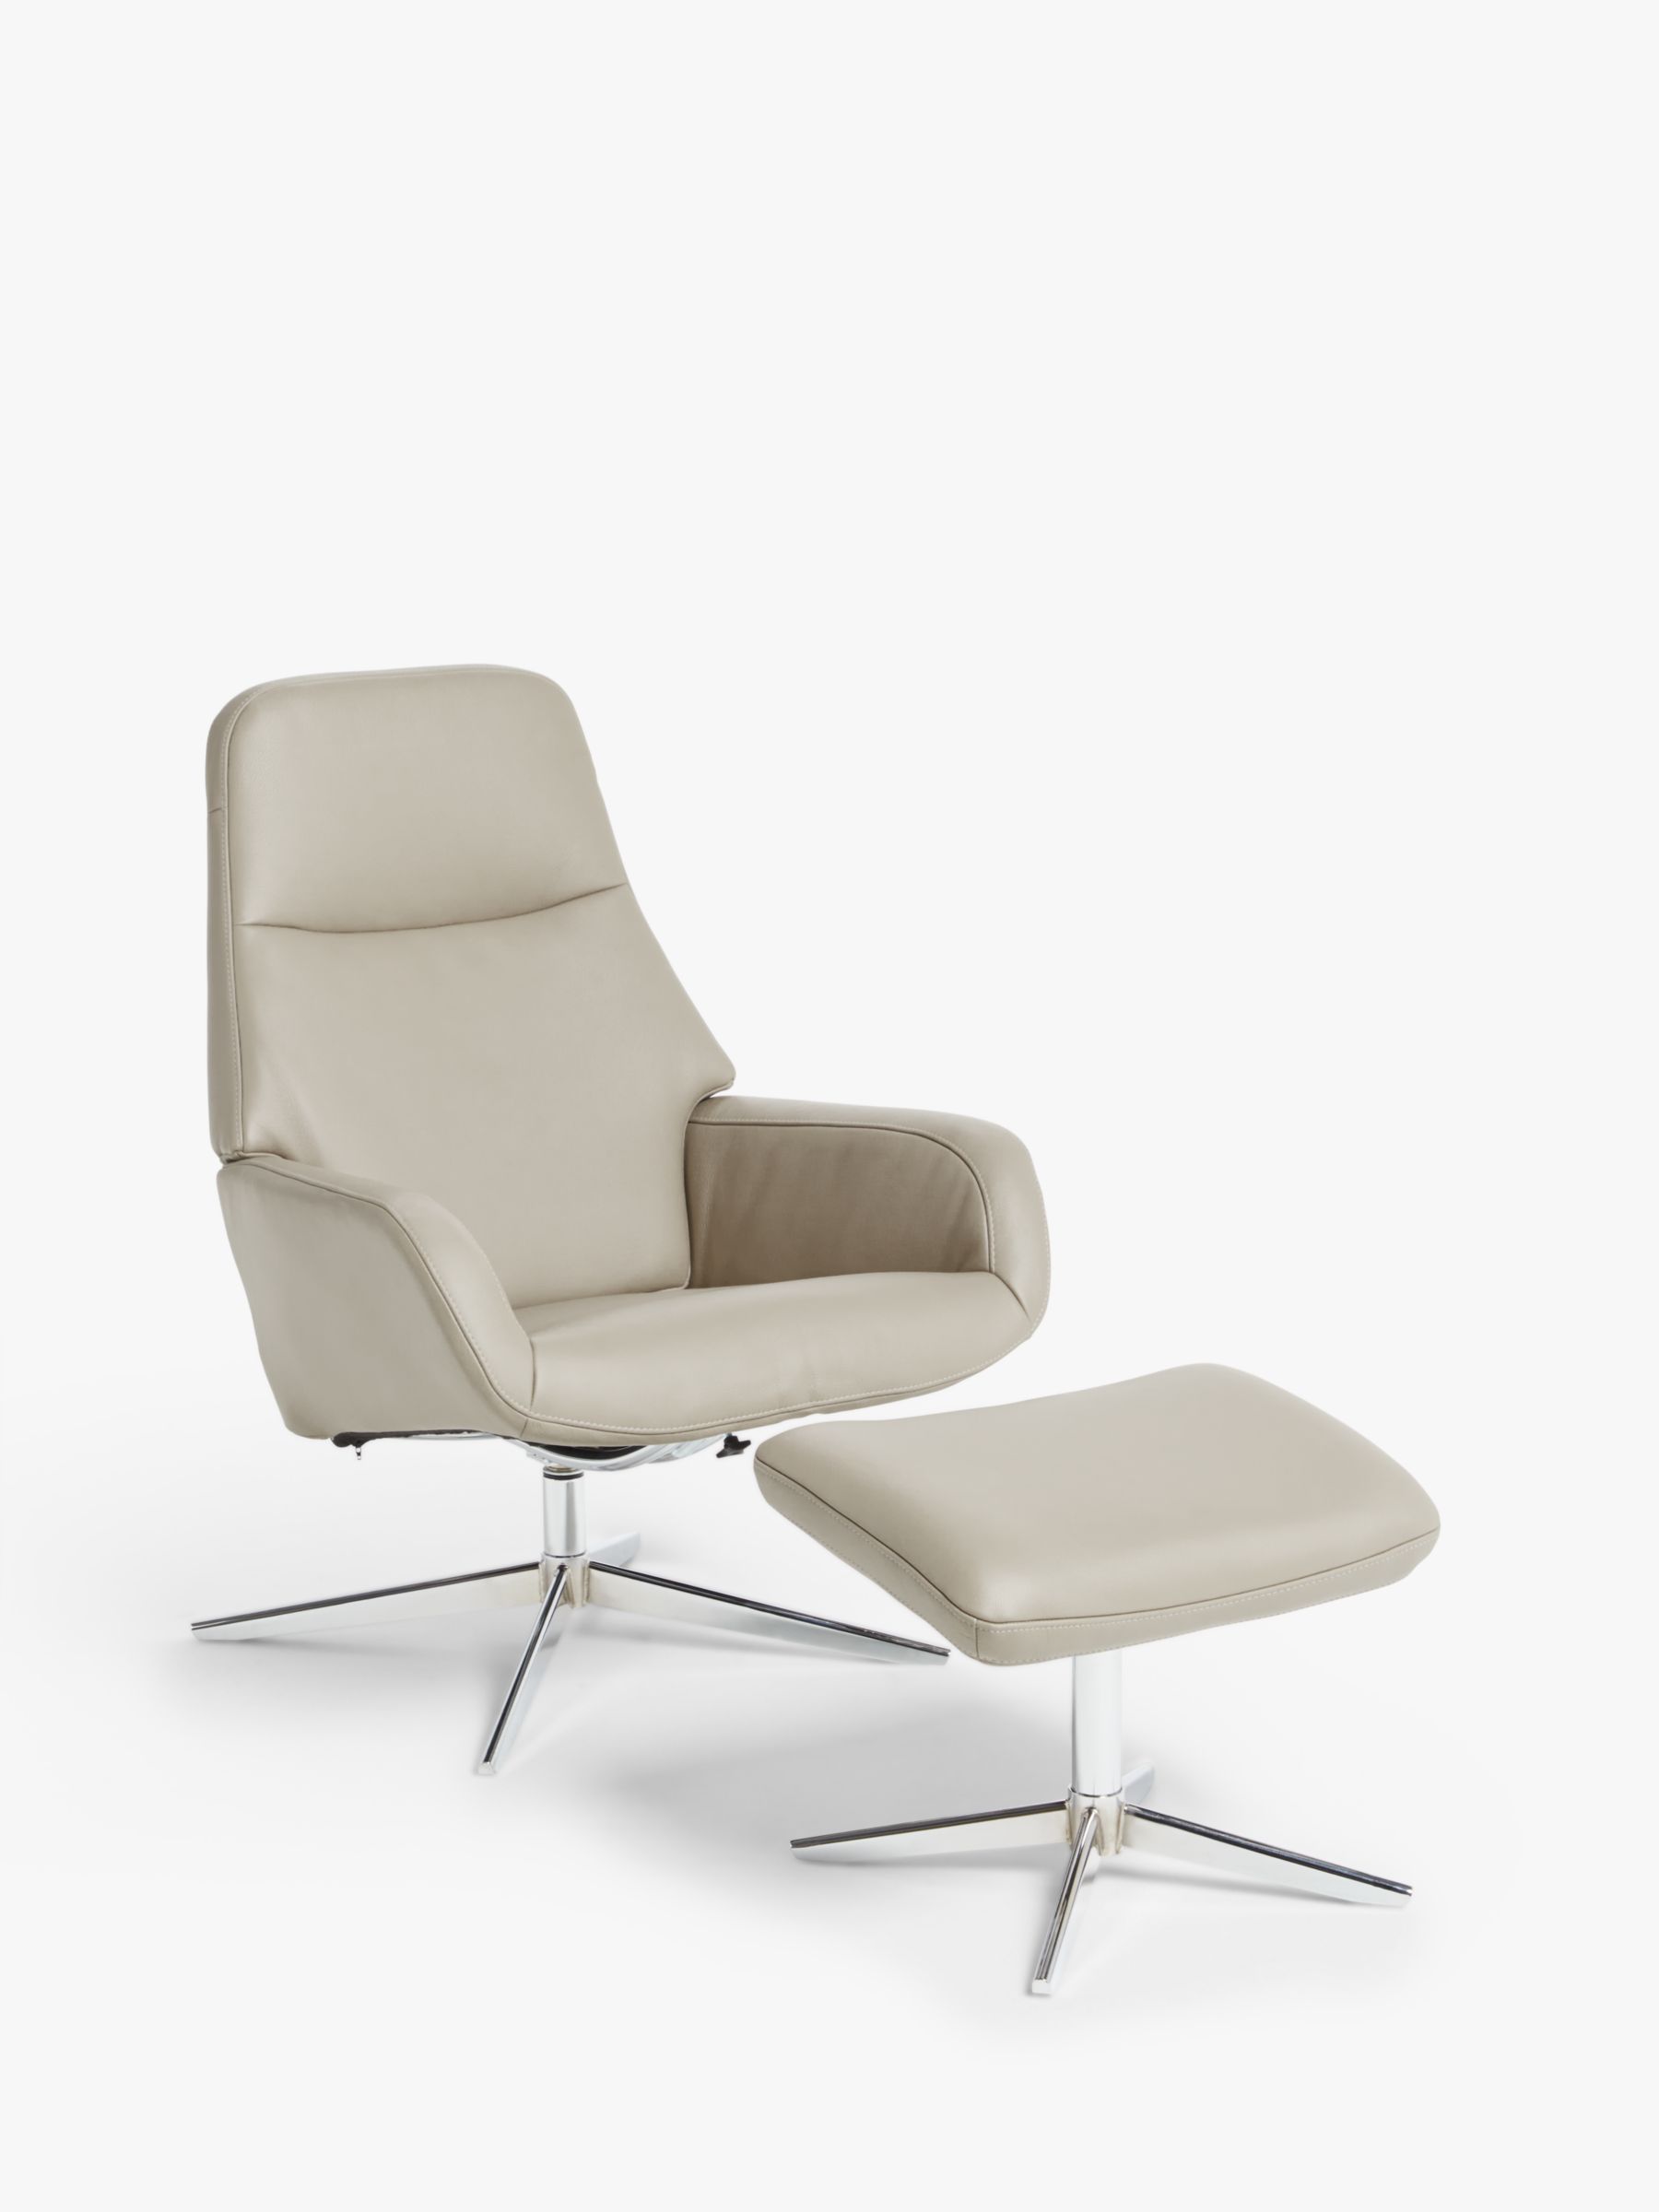 John Lewis Pause Reclining Chair with Footstool